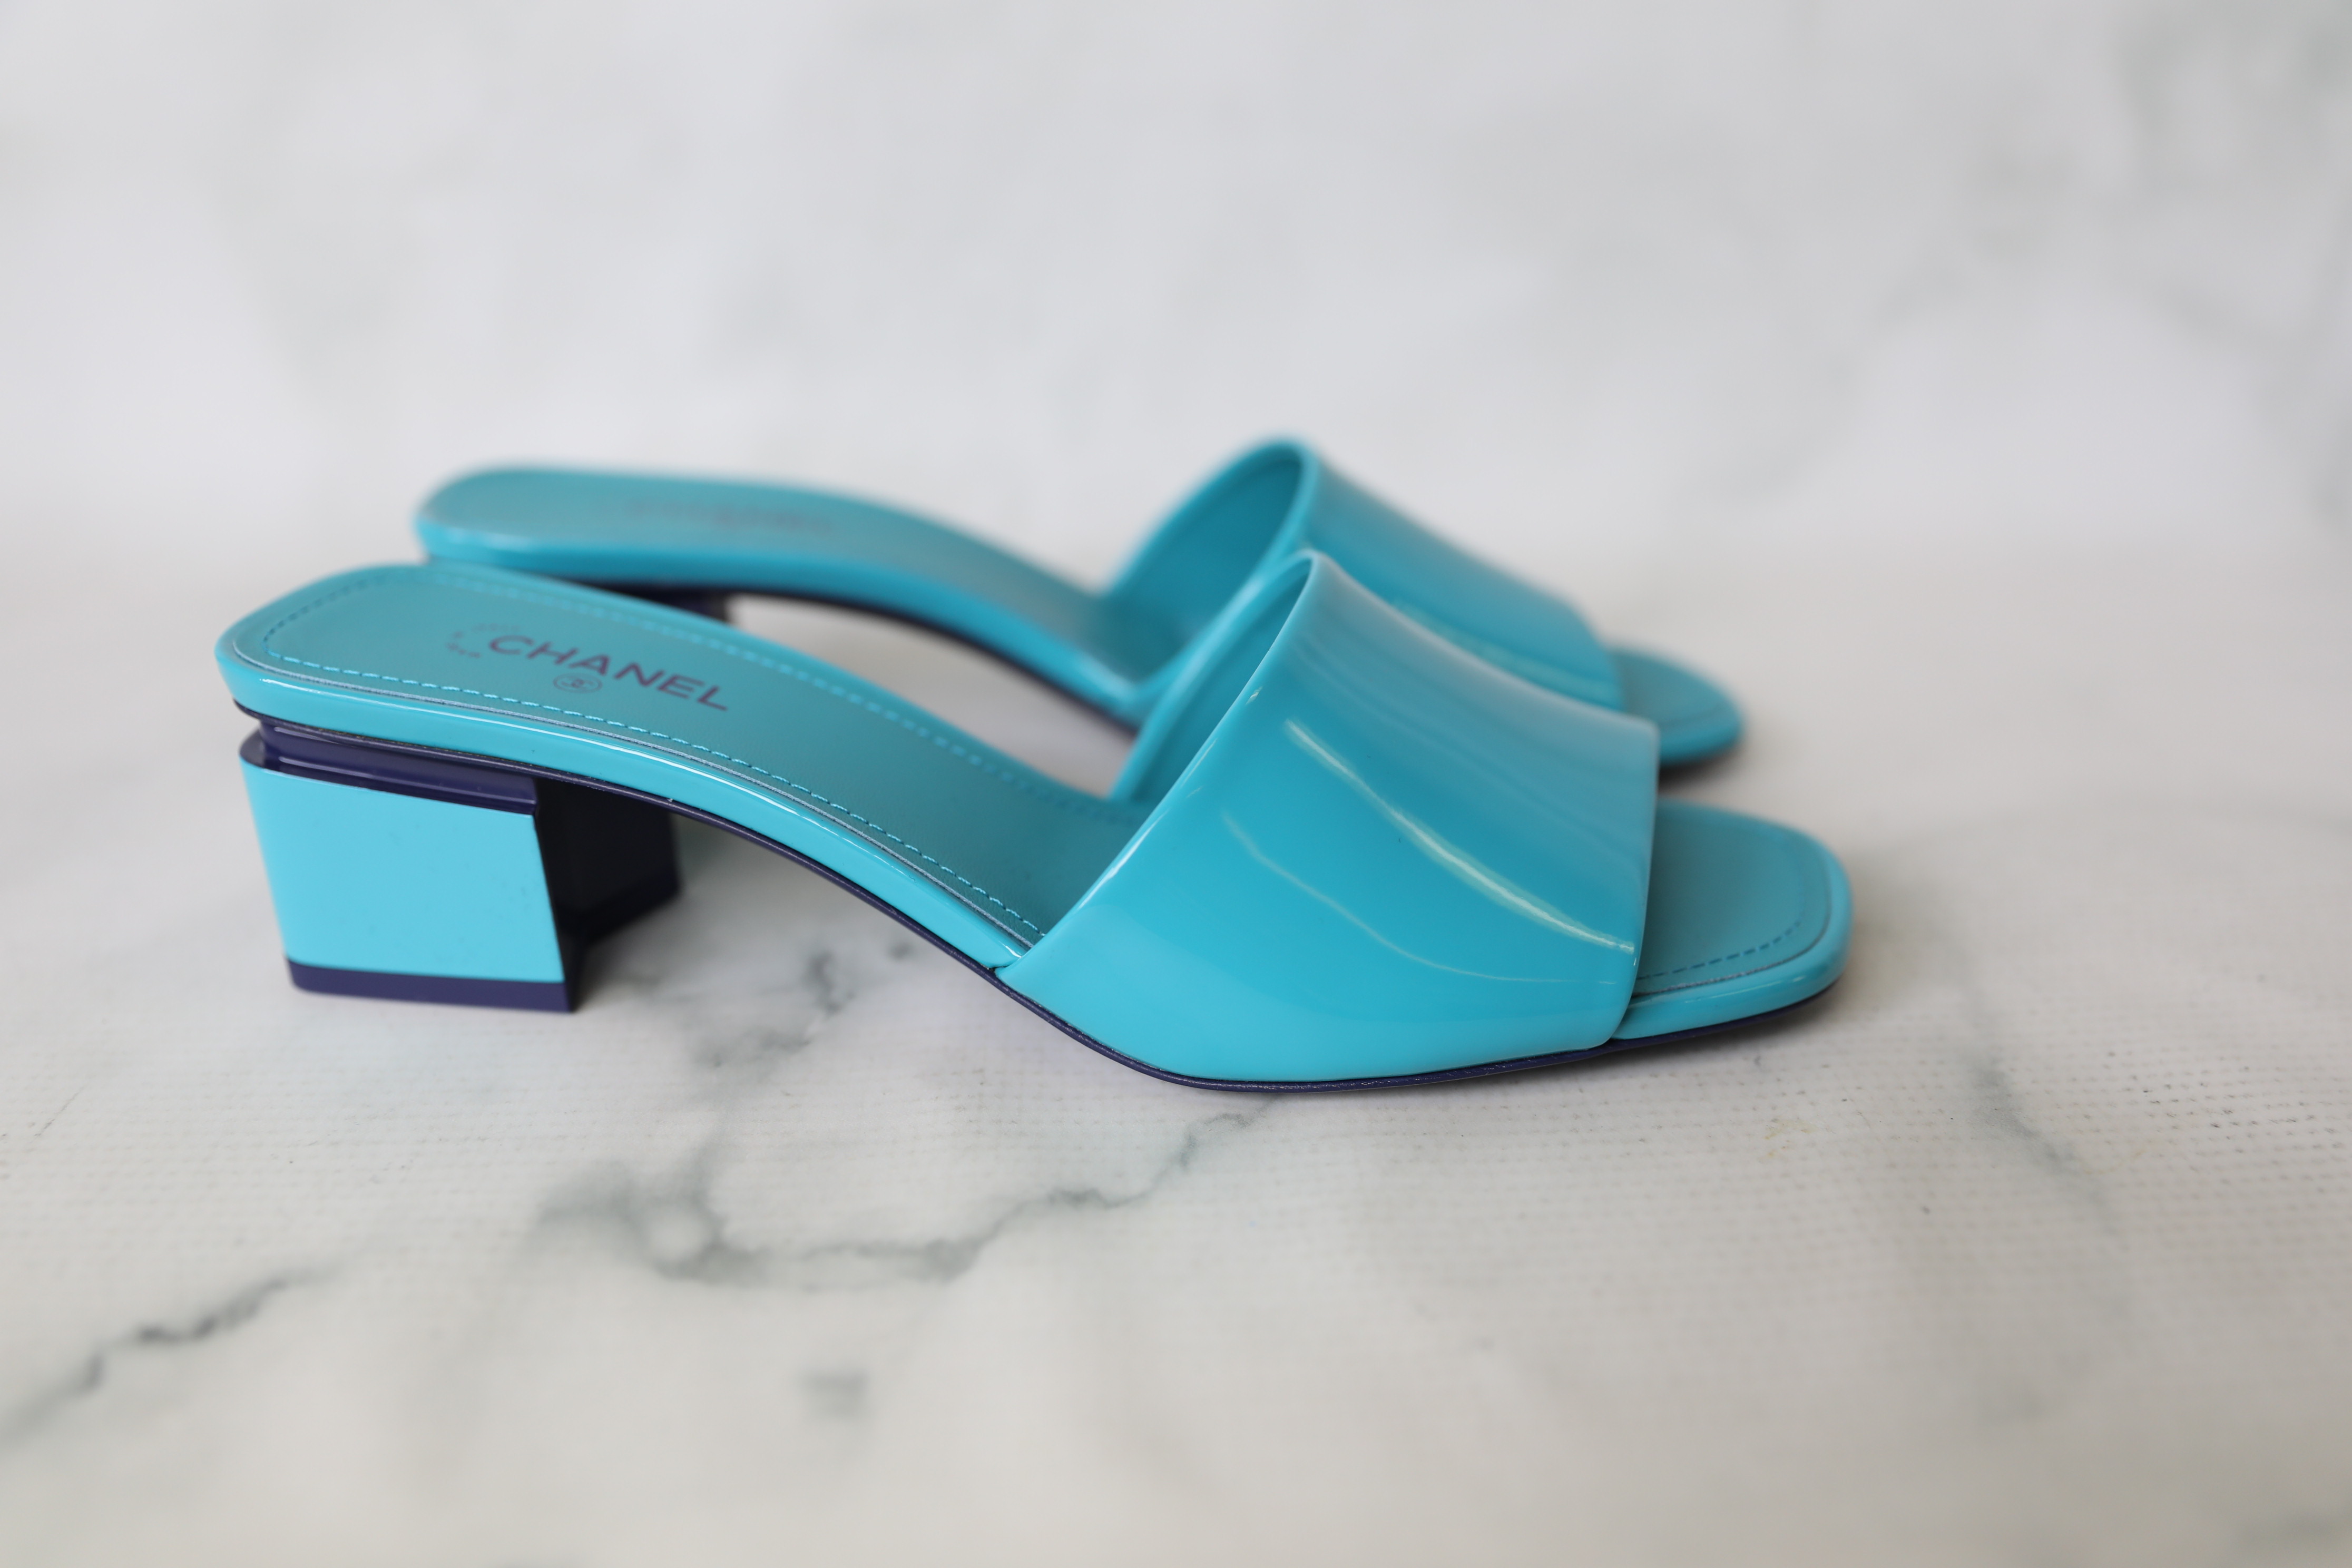 Chanel Shoes Slide Mules with Mid Heel, Blue, Size 38.5, New in Box WA001